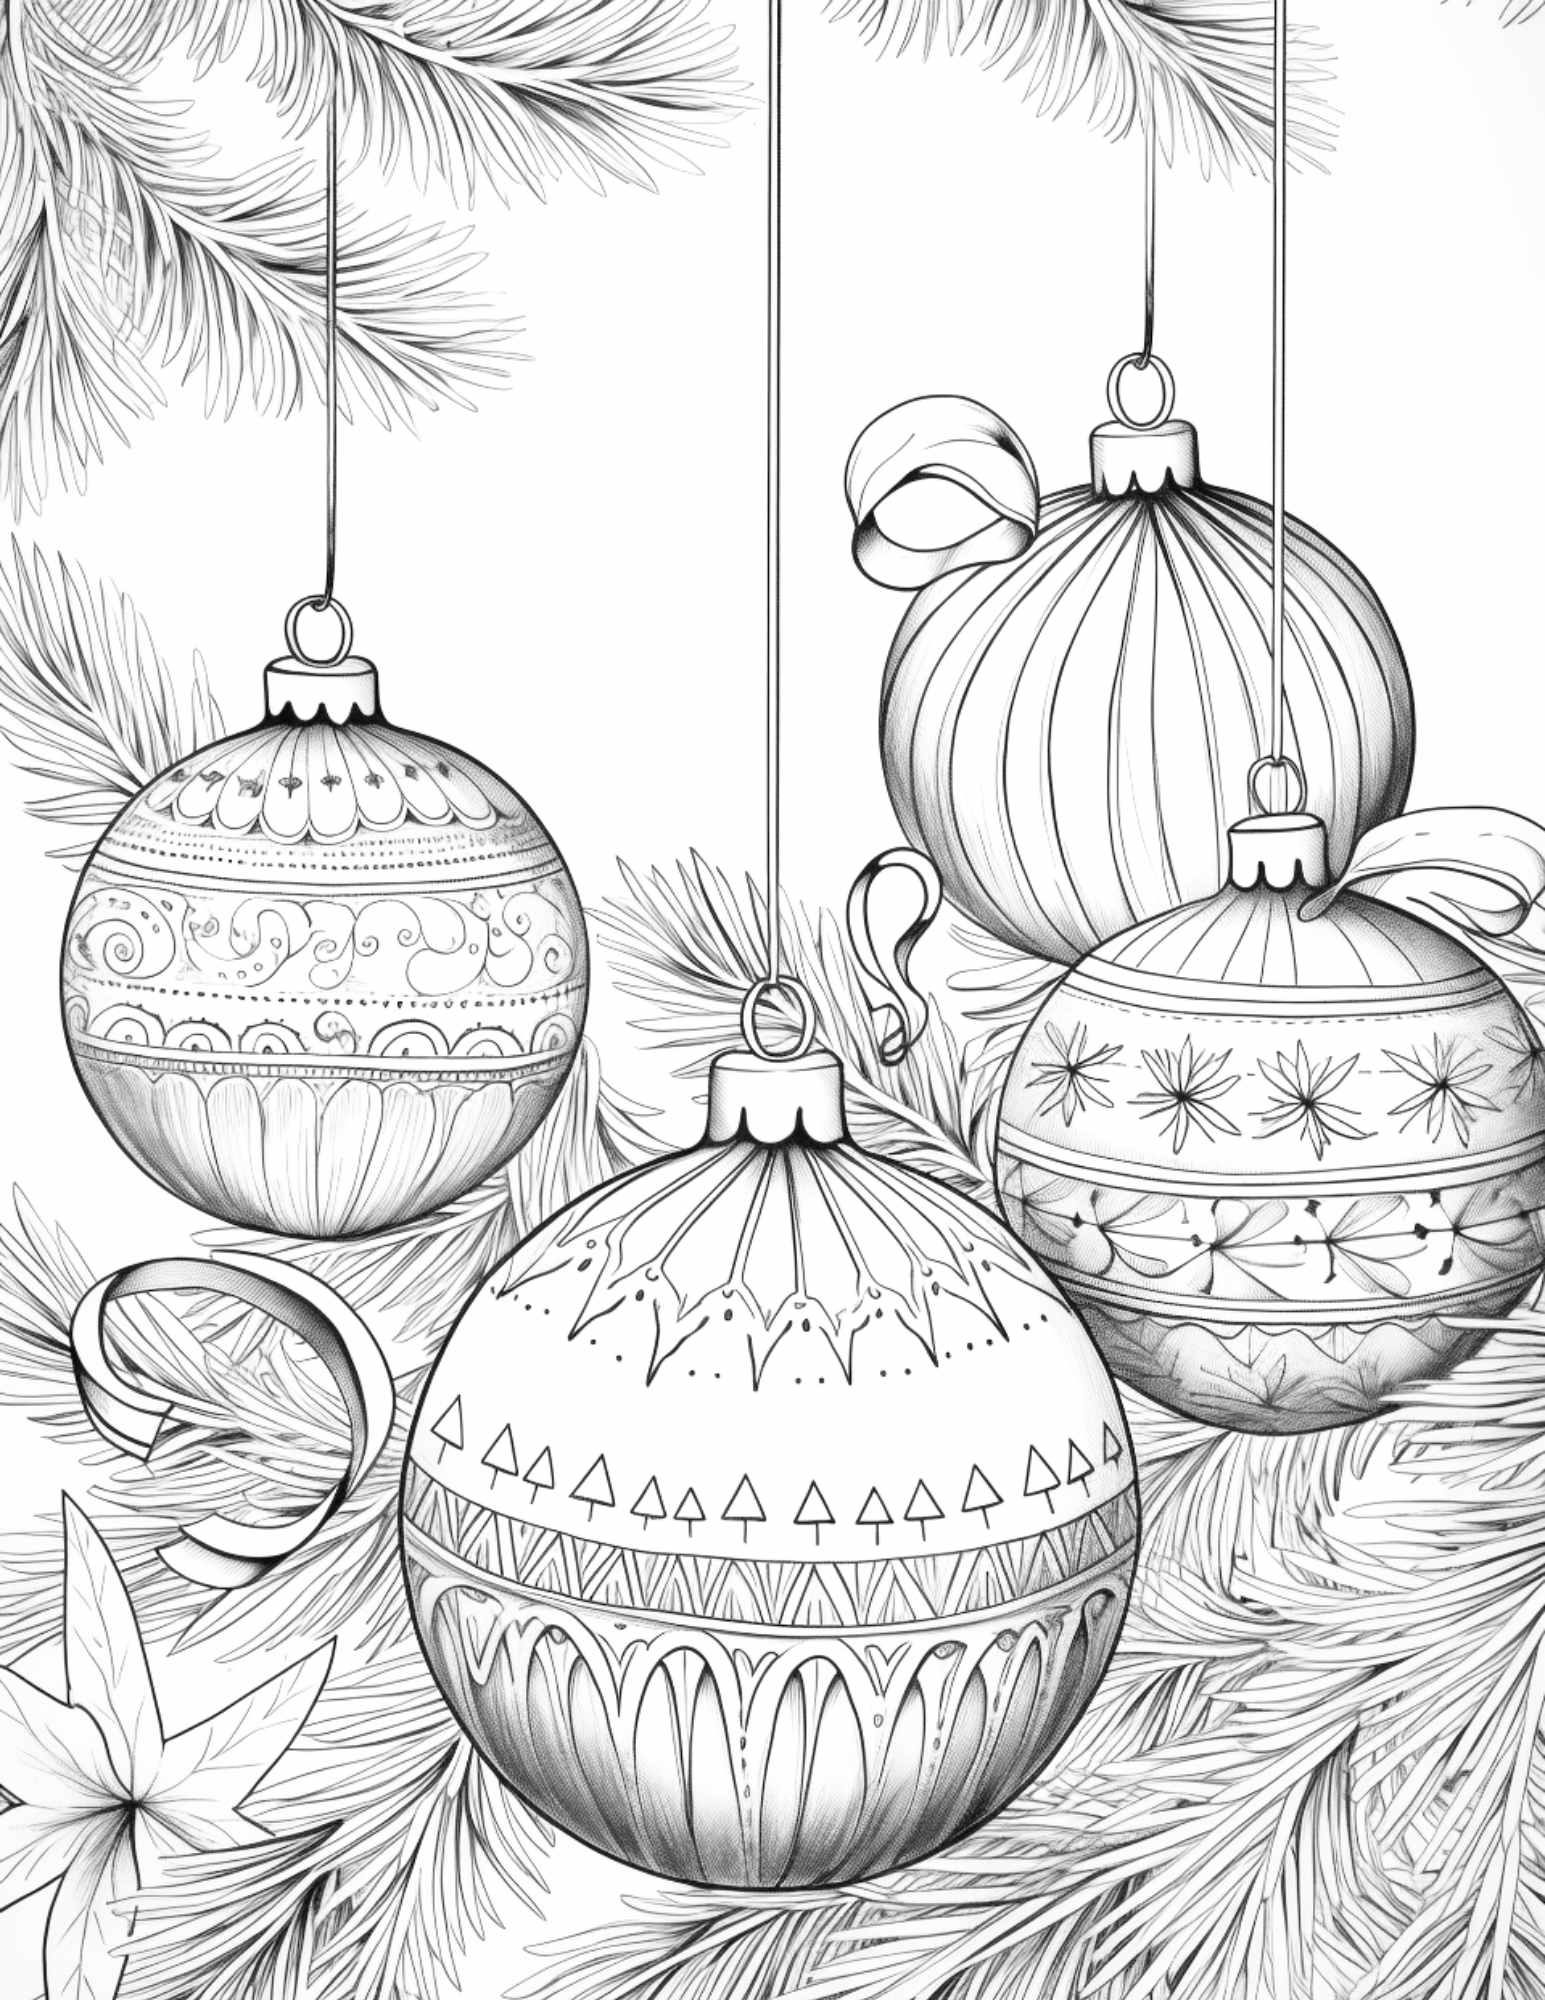 Christmas Coloring Paper Decorations Graphic by gyneenyg